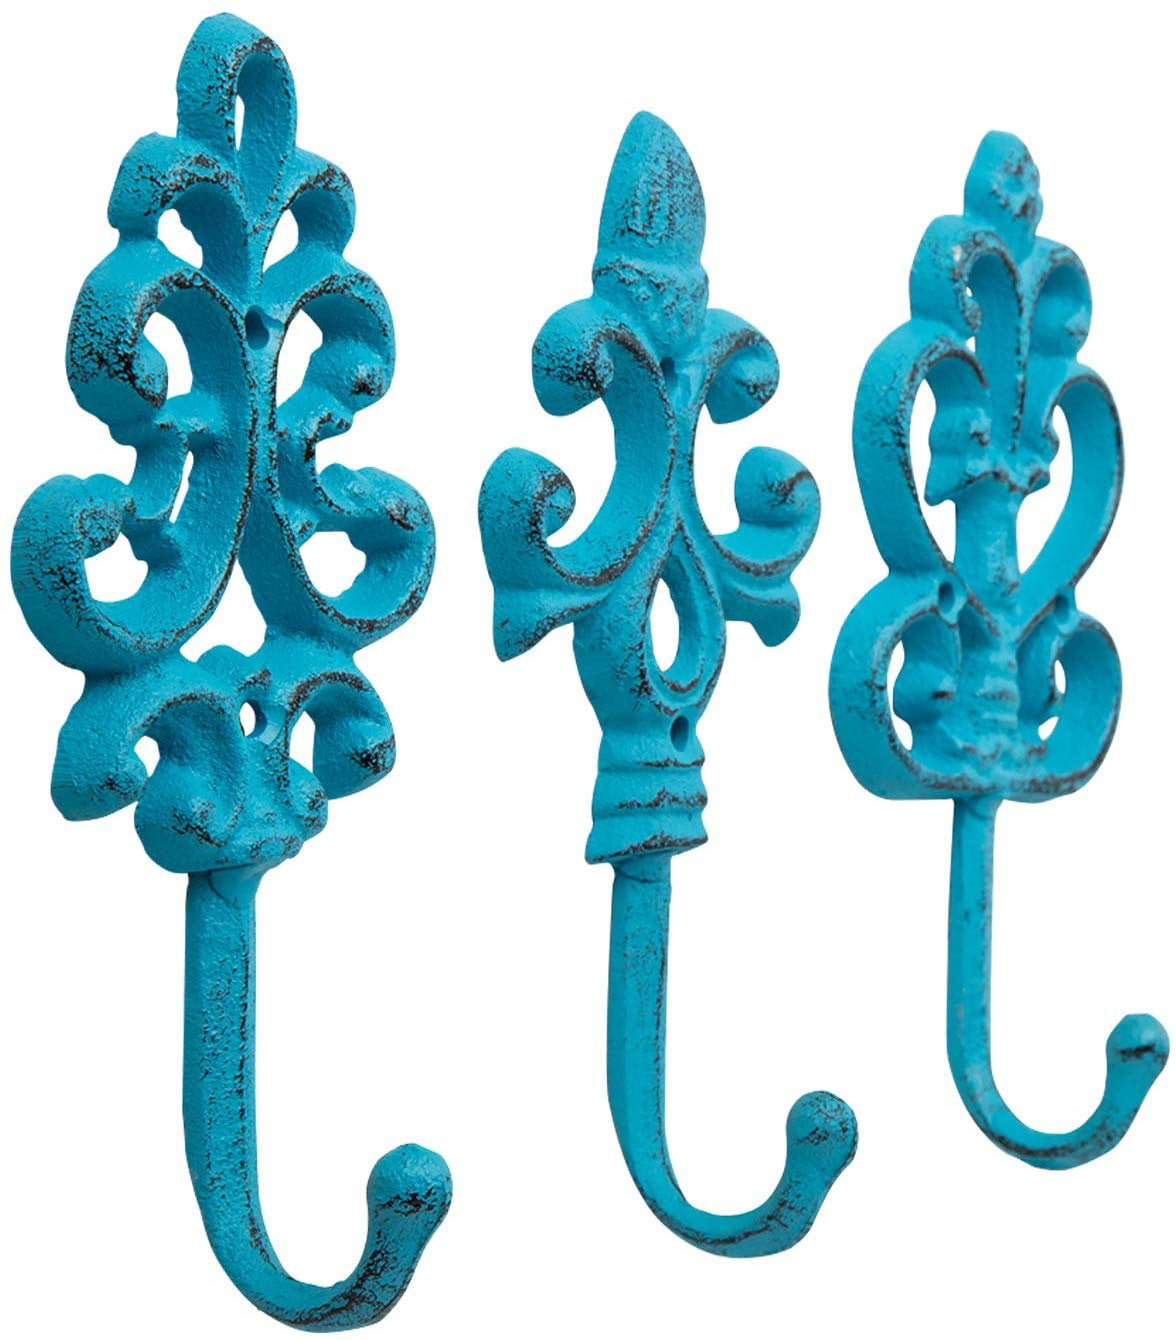 Shabby Chic Cast Iron Decorative Wall Hooks - Rustic - Antique - French  Country Charm - Large Decorative Hanging Hooks - Set of 3 - Screws and  Anchors for Mounting Included 